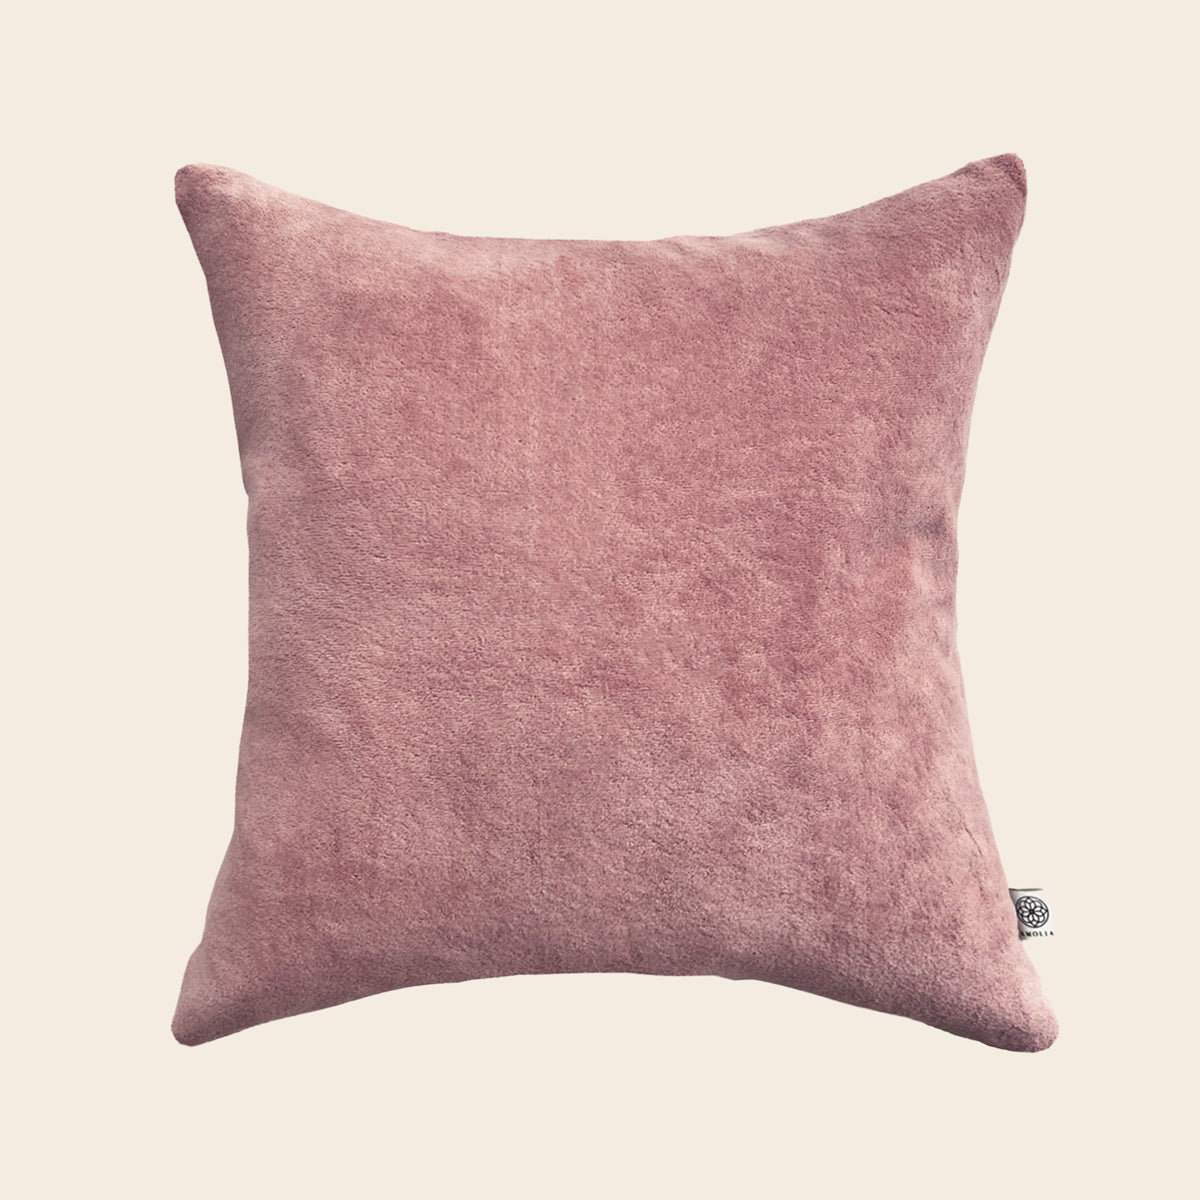 Upcycled cushion cover, 40x40cm, powder pink